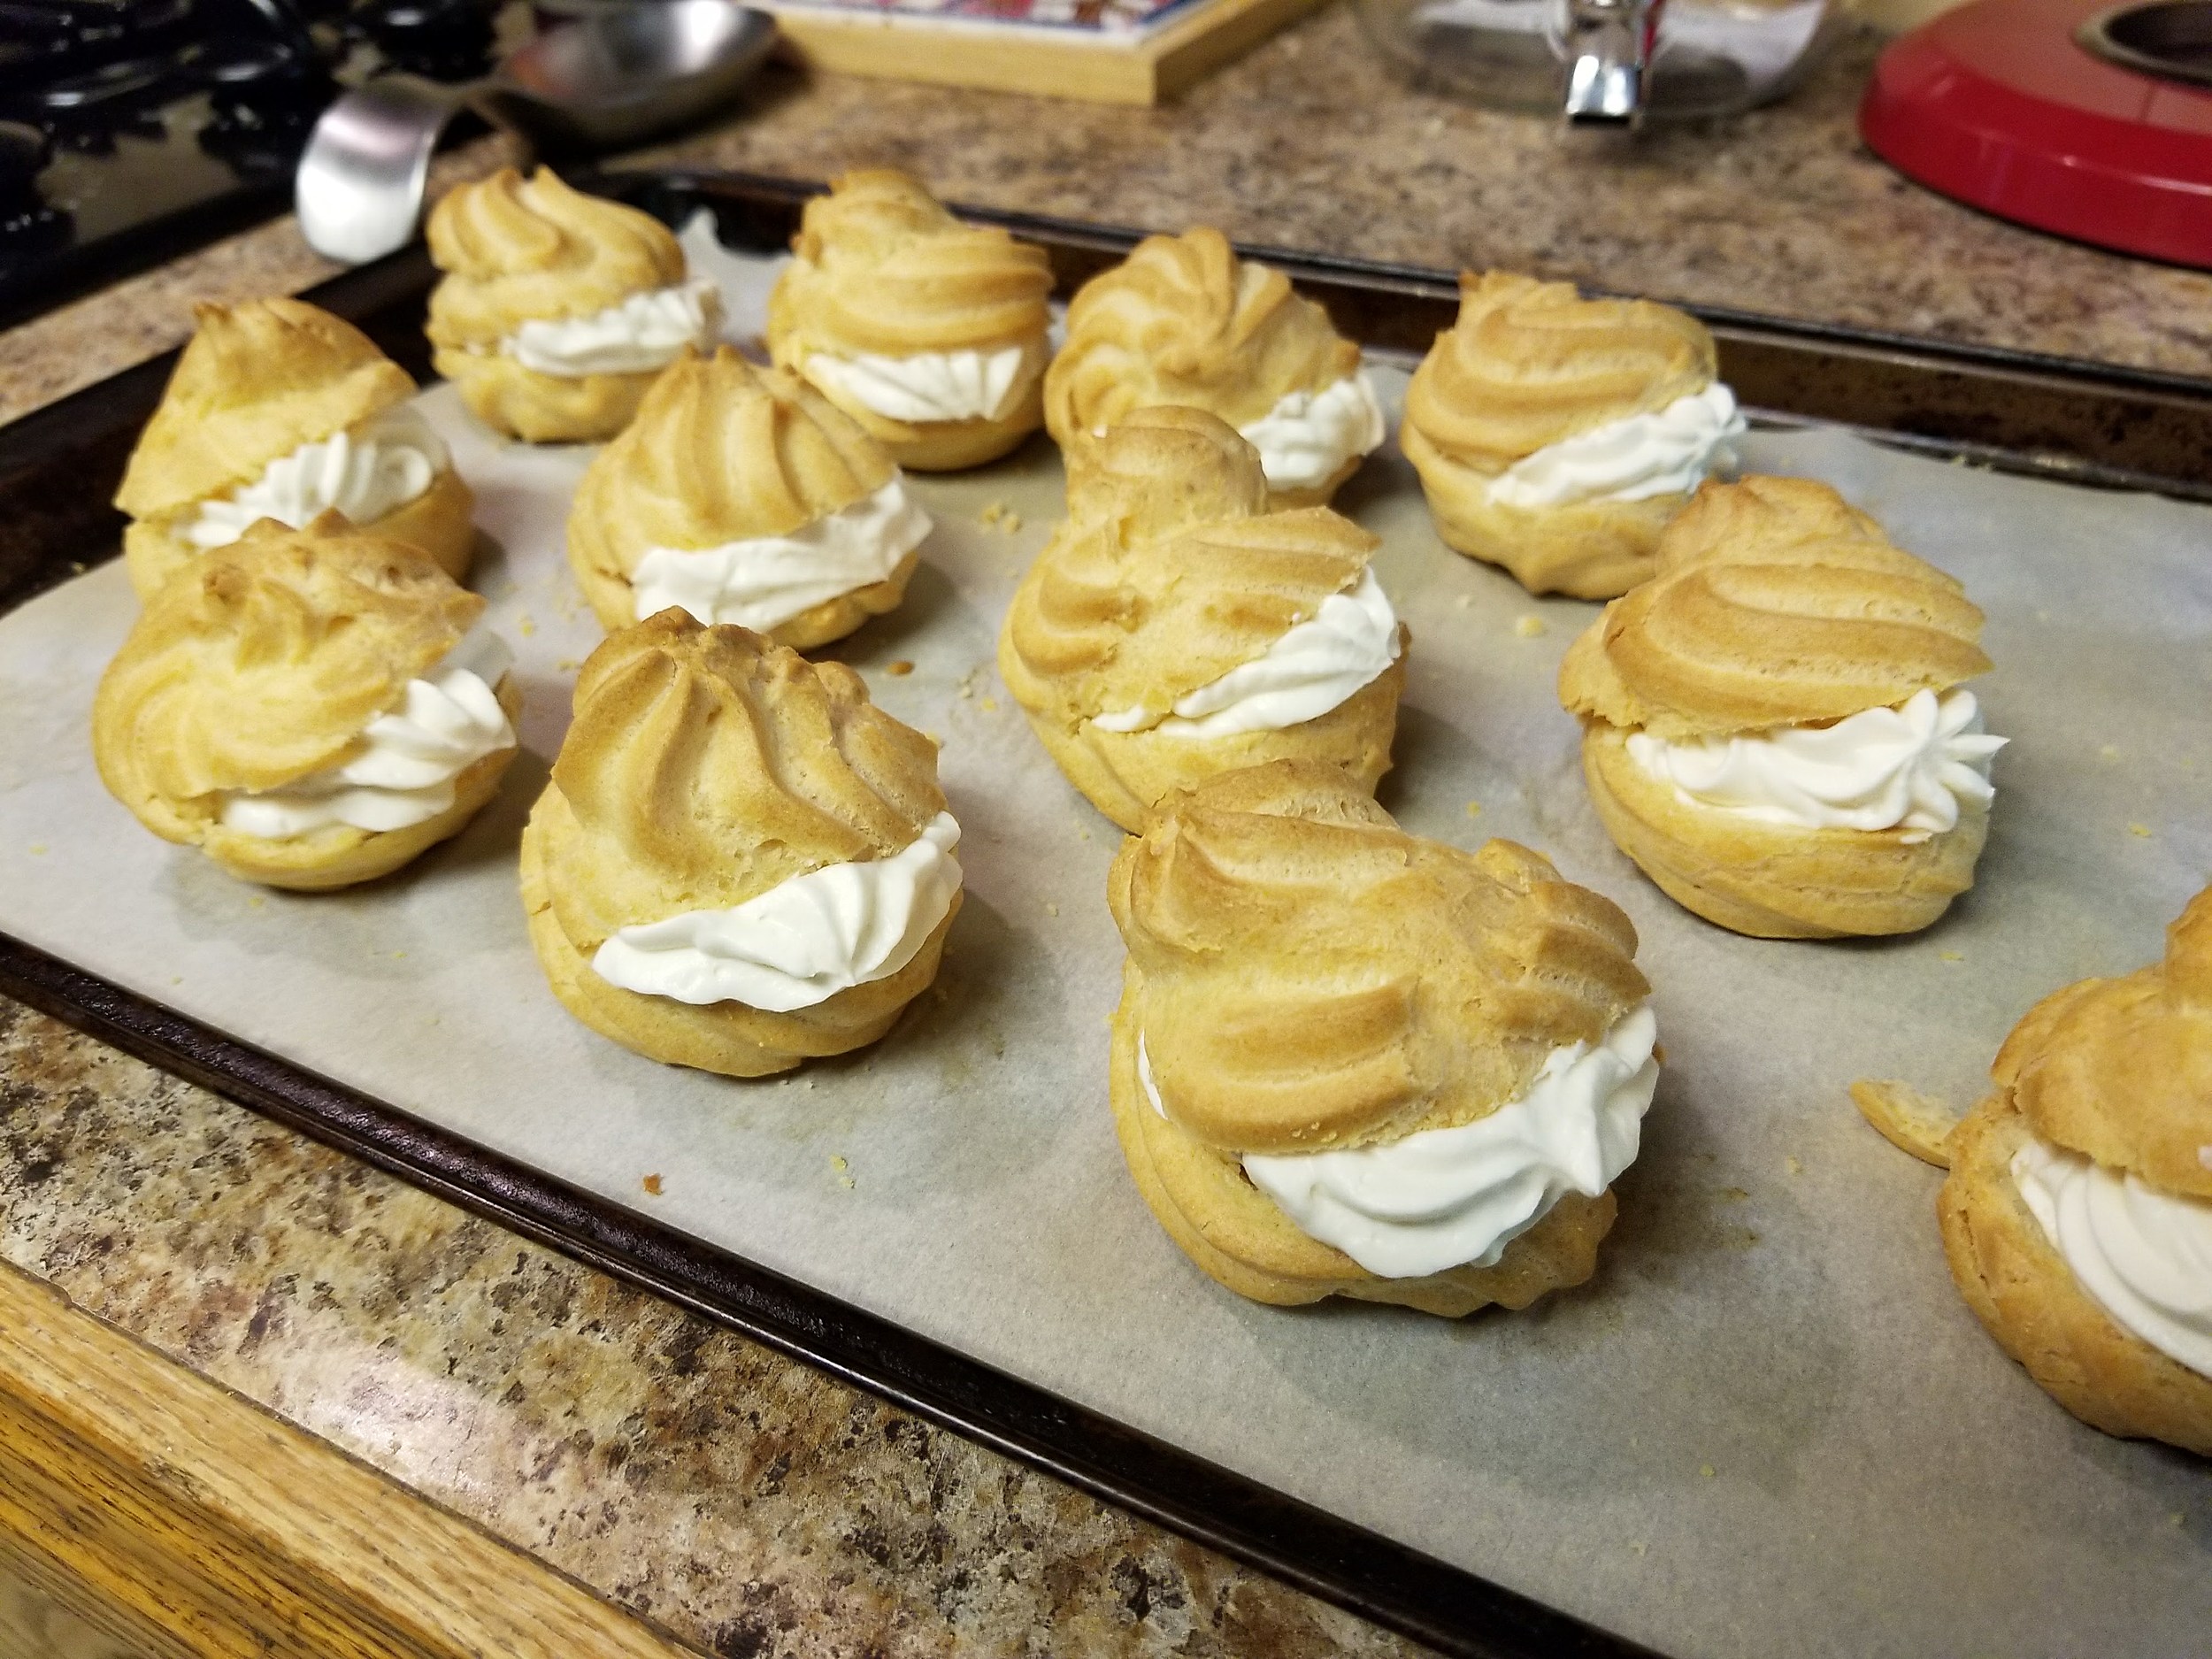 Chef Weaver's First Attempt at Cream Puffs – Came Out Pretty Good
